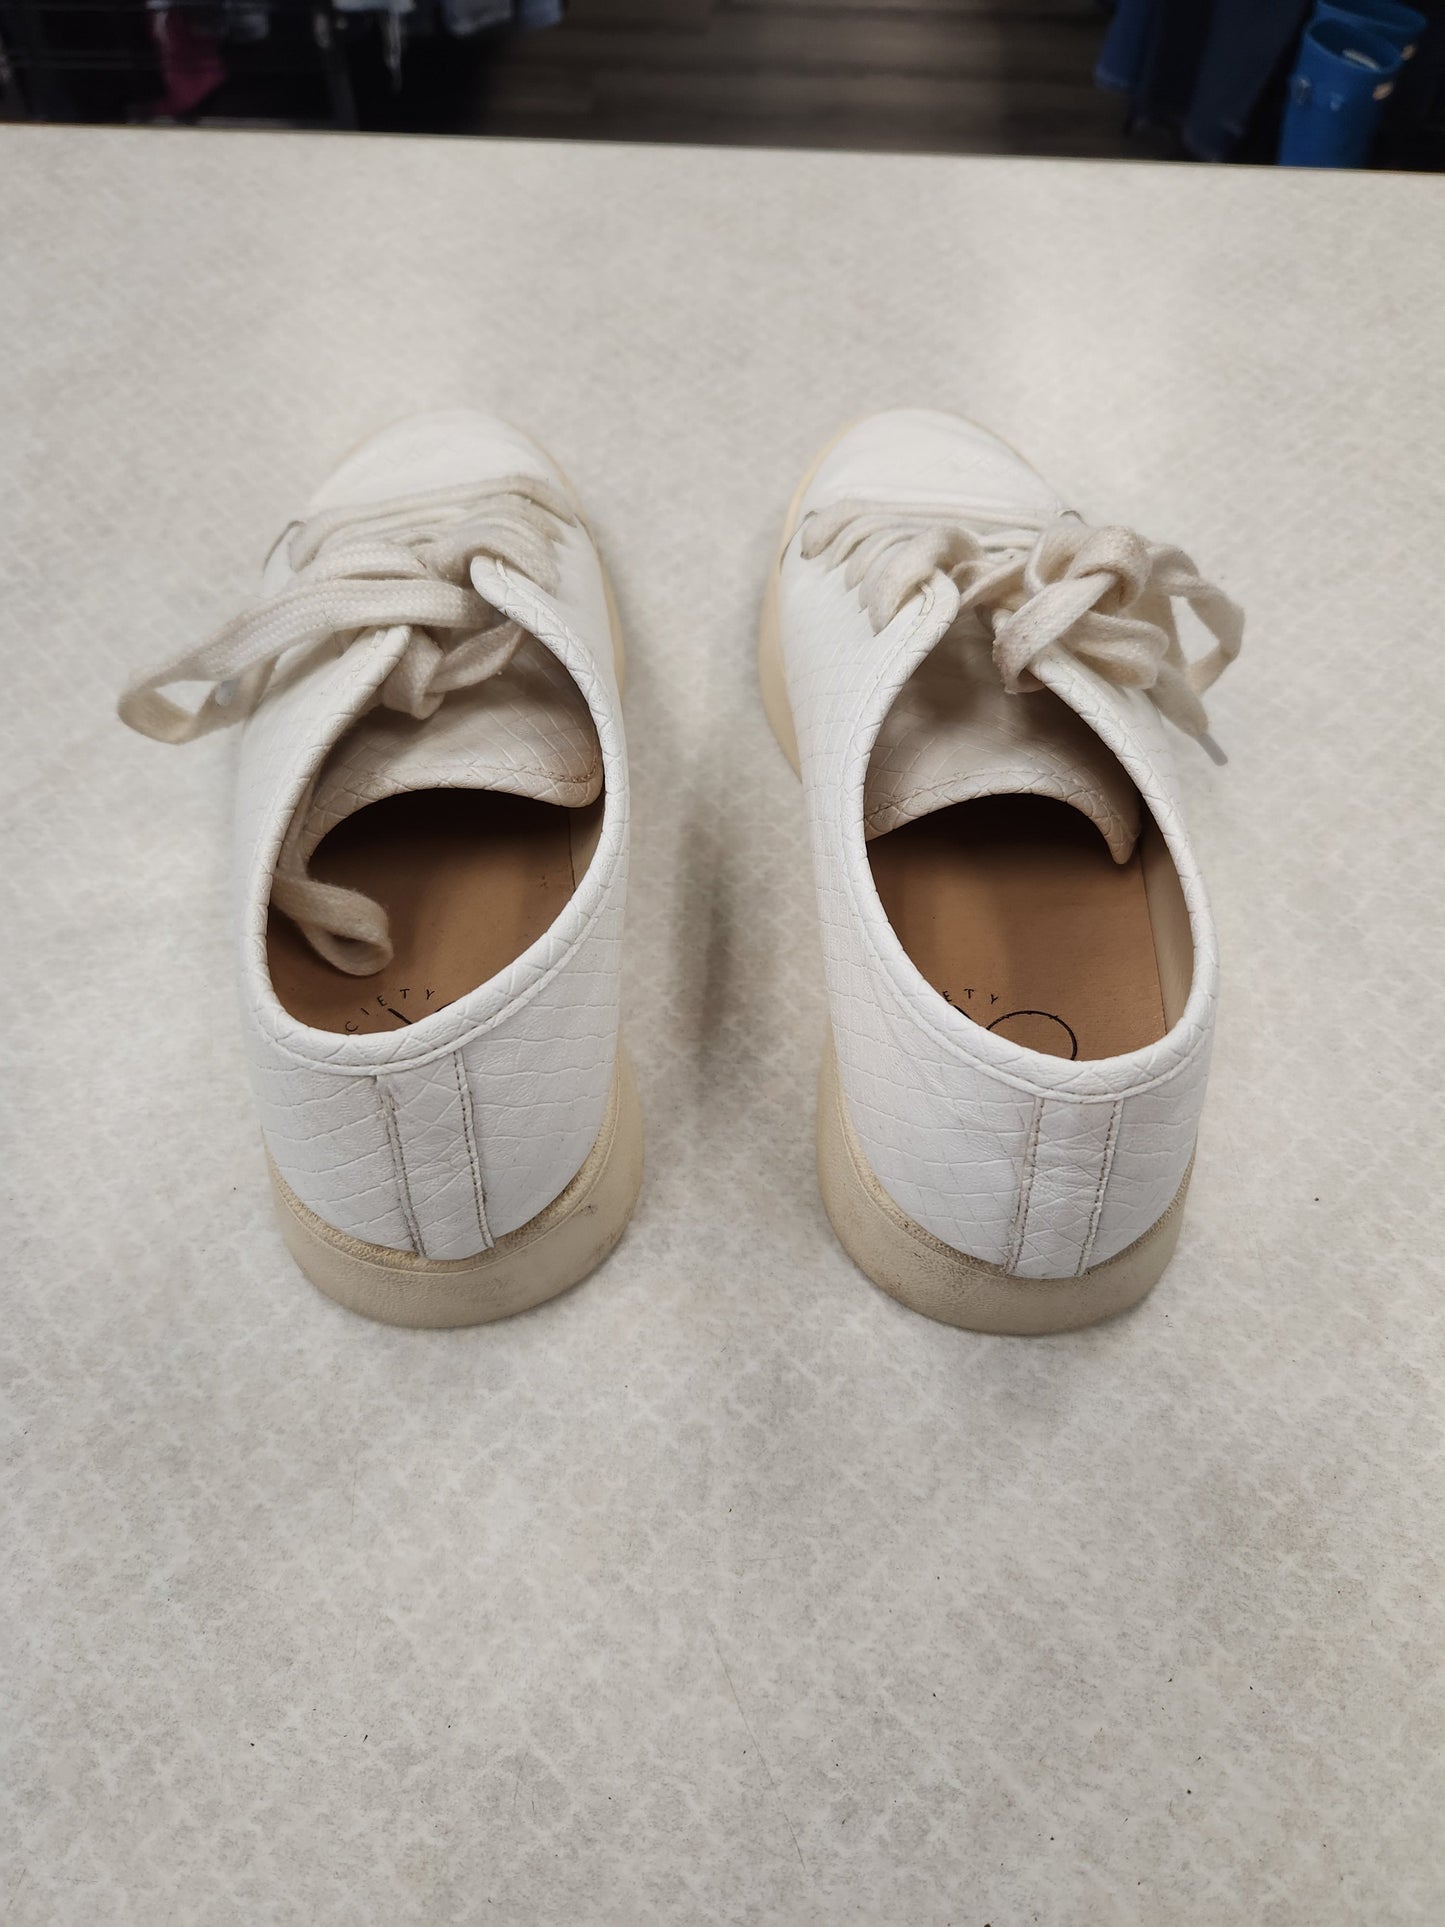 White Shoes Sneakers Clothes Mentor, Size 7.5